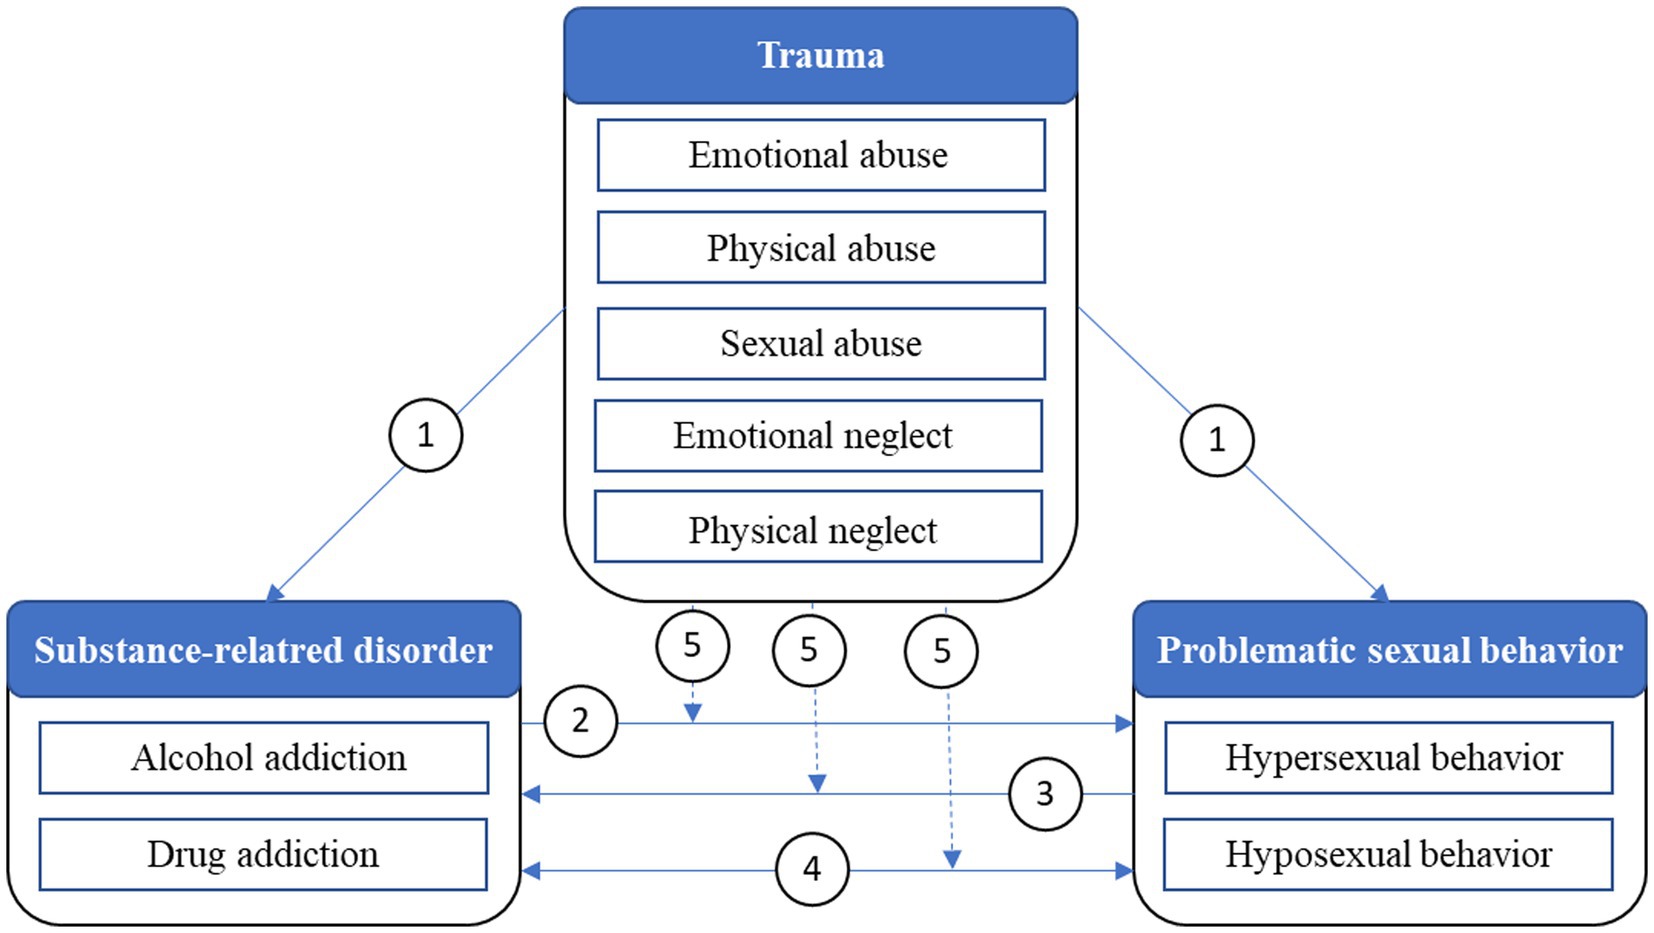 Frontiers Study protocol Hypersexual and hyposexual behavior among adults diagnosed with alcohol- and substance use disorders—Associations between traumatic experiences and problematic sexual behavior